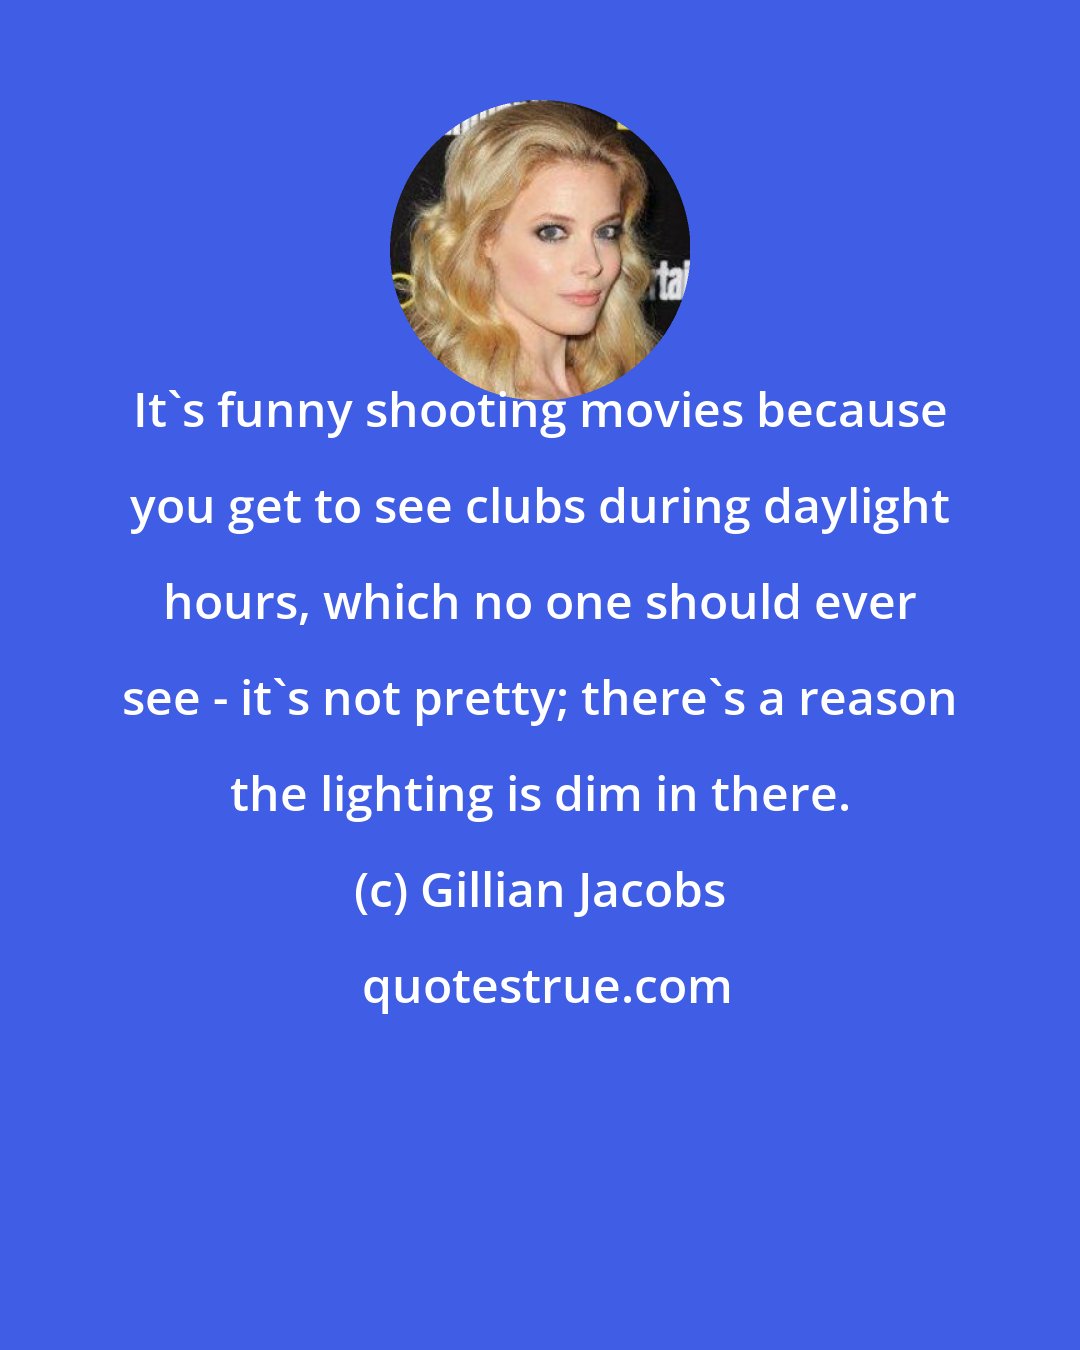 Gillian Jacobs: It's funny shooting movies because you get to see clubs during daylight hours, which no one should ever see - it's not pretty; there's a reason the lighting is dim in there.